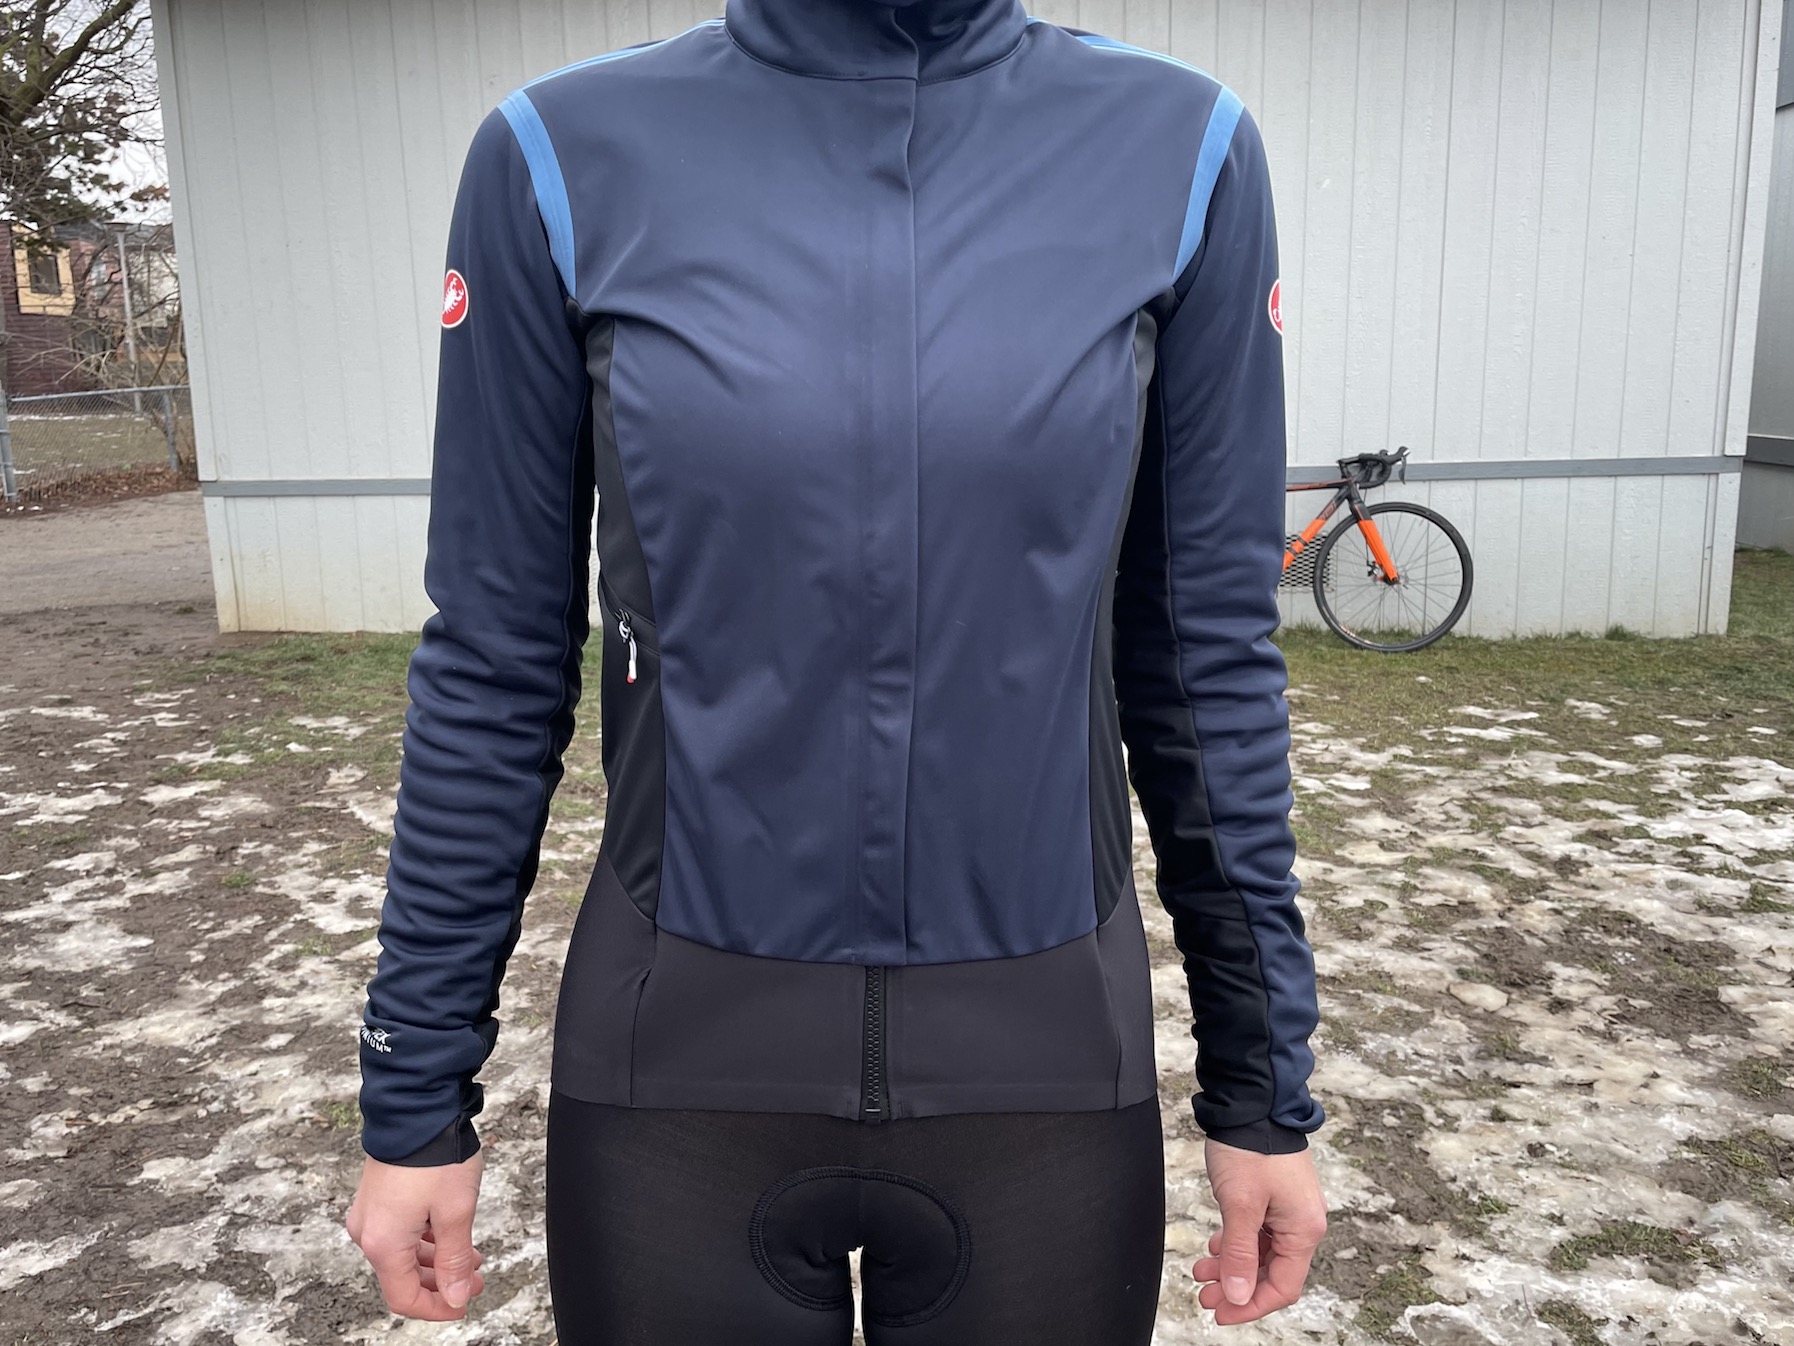 Review: Castelli winter jacket and bibtights - Canadian Cycling